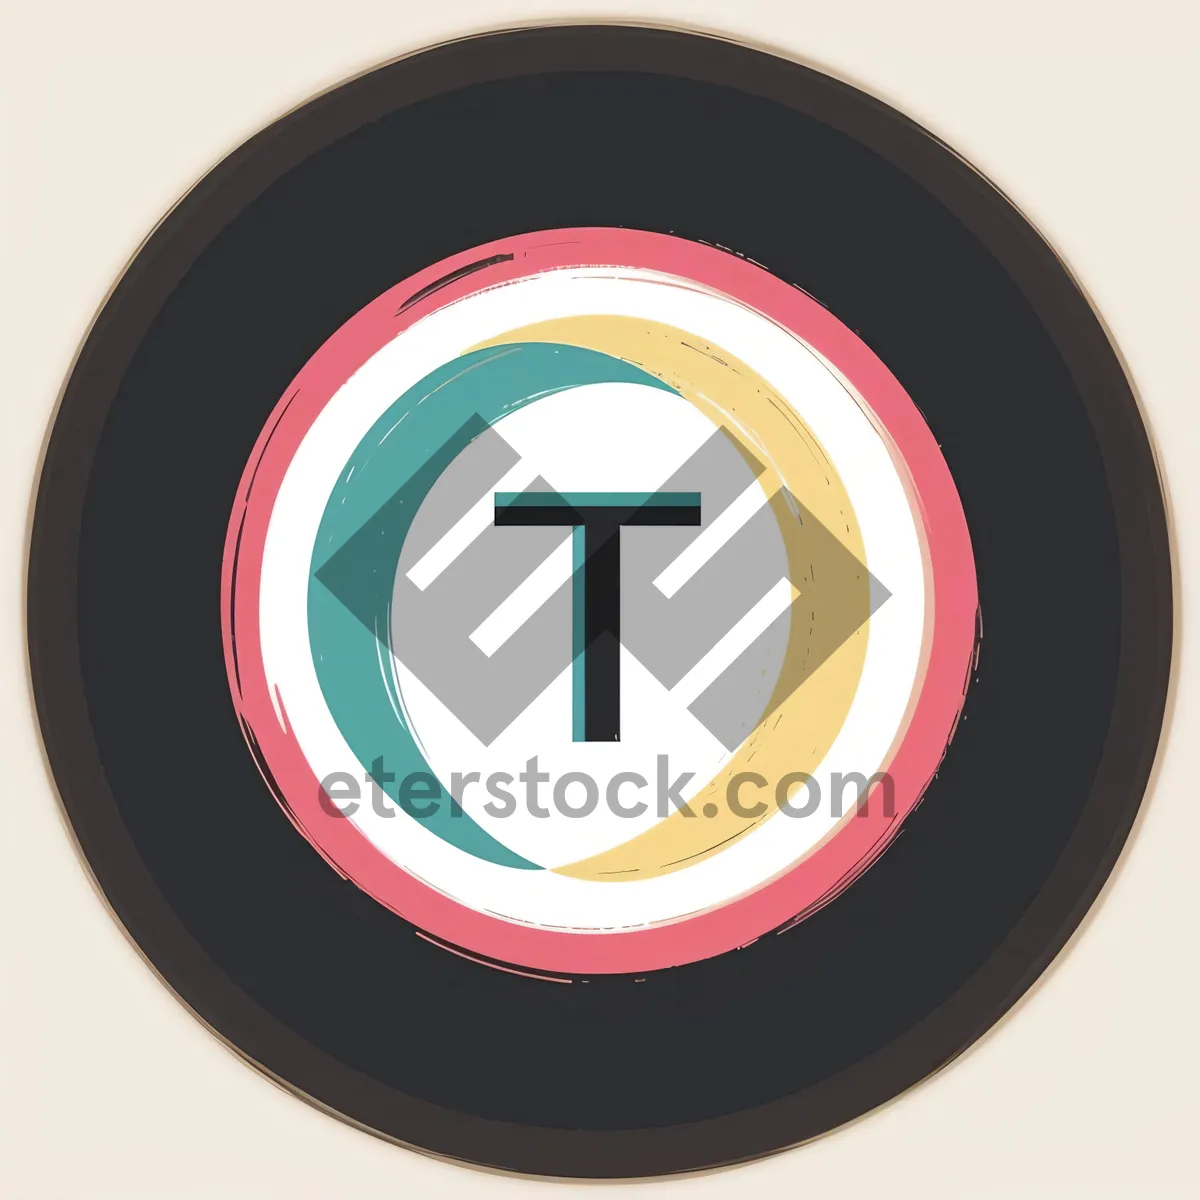 Picture of Glossy Round Button Icon for Japan-Inspired Website Design